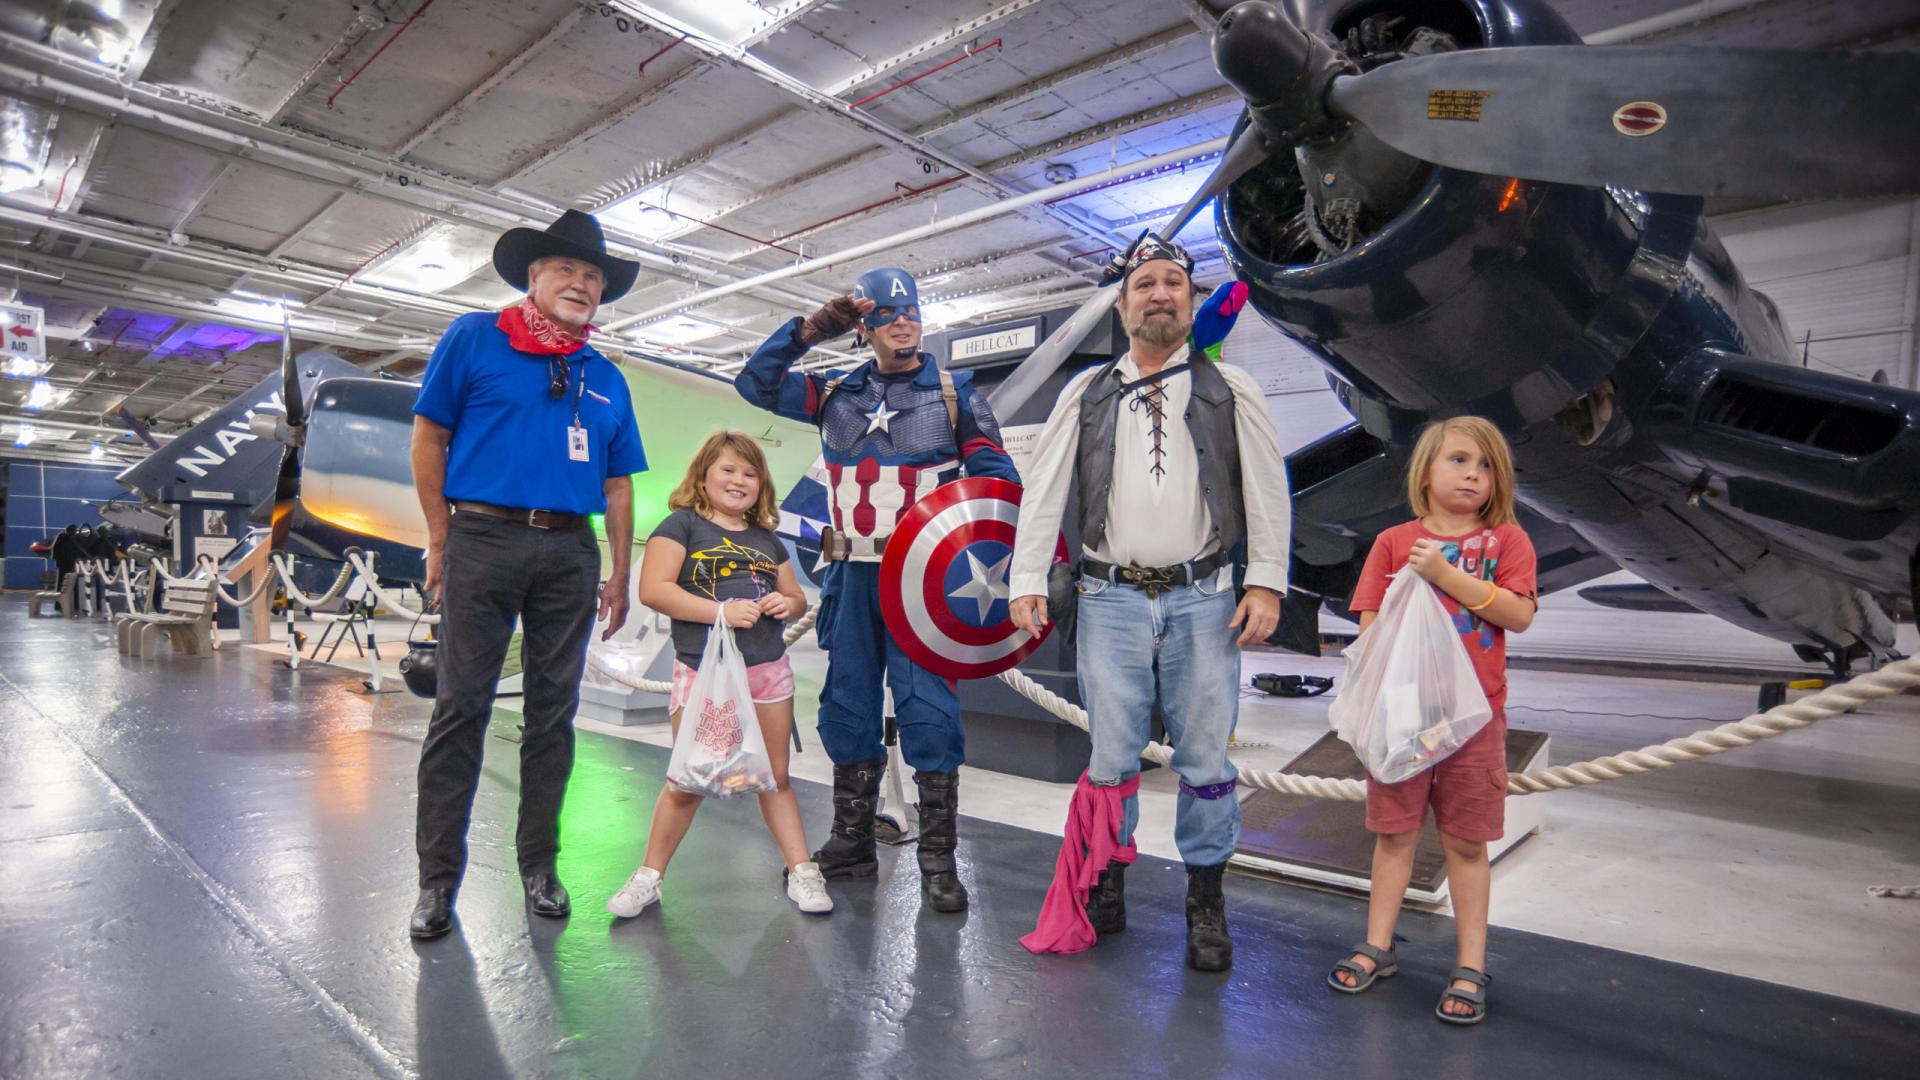 Group dressed up for Halloween. Cowboy, Captain America, Pirate to name a few.